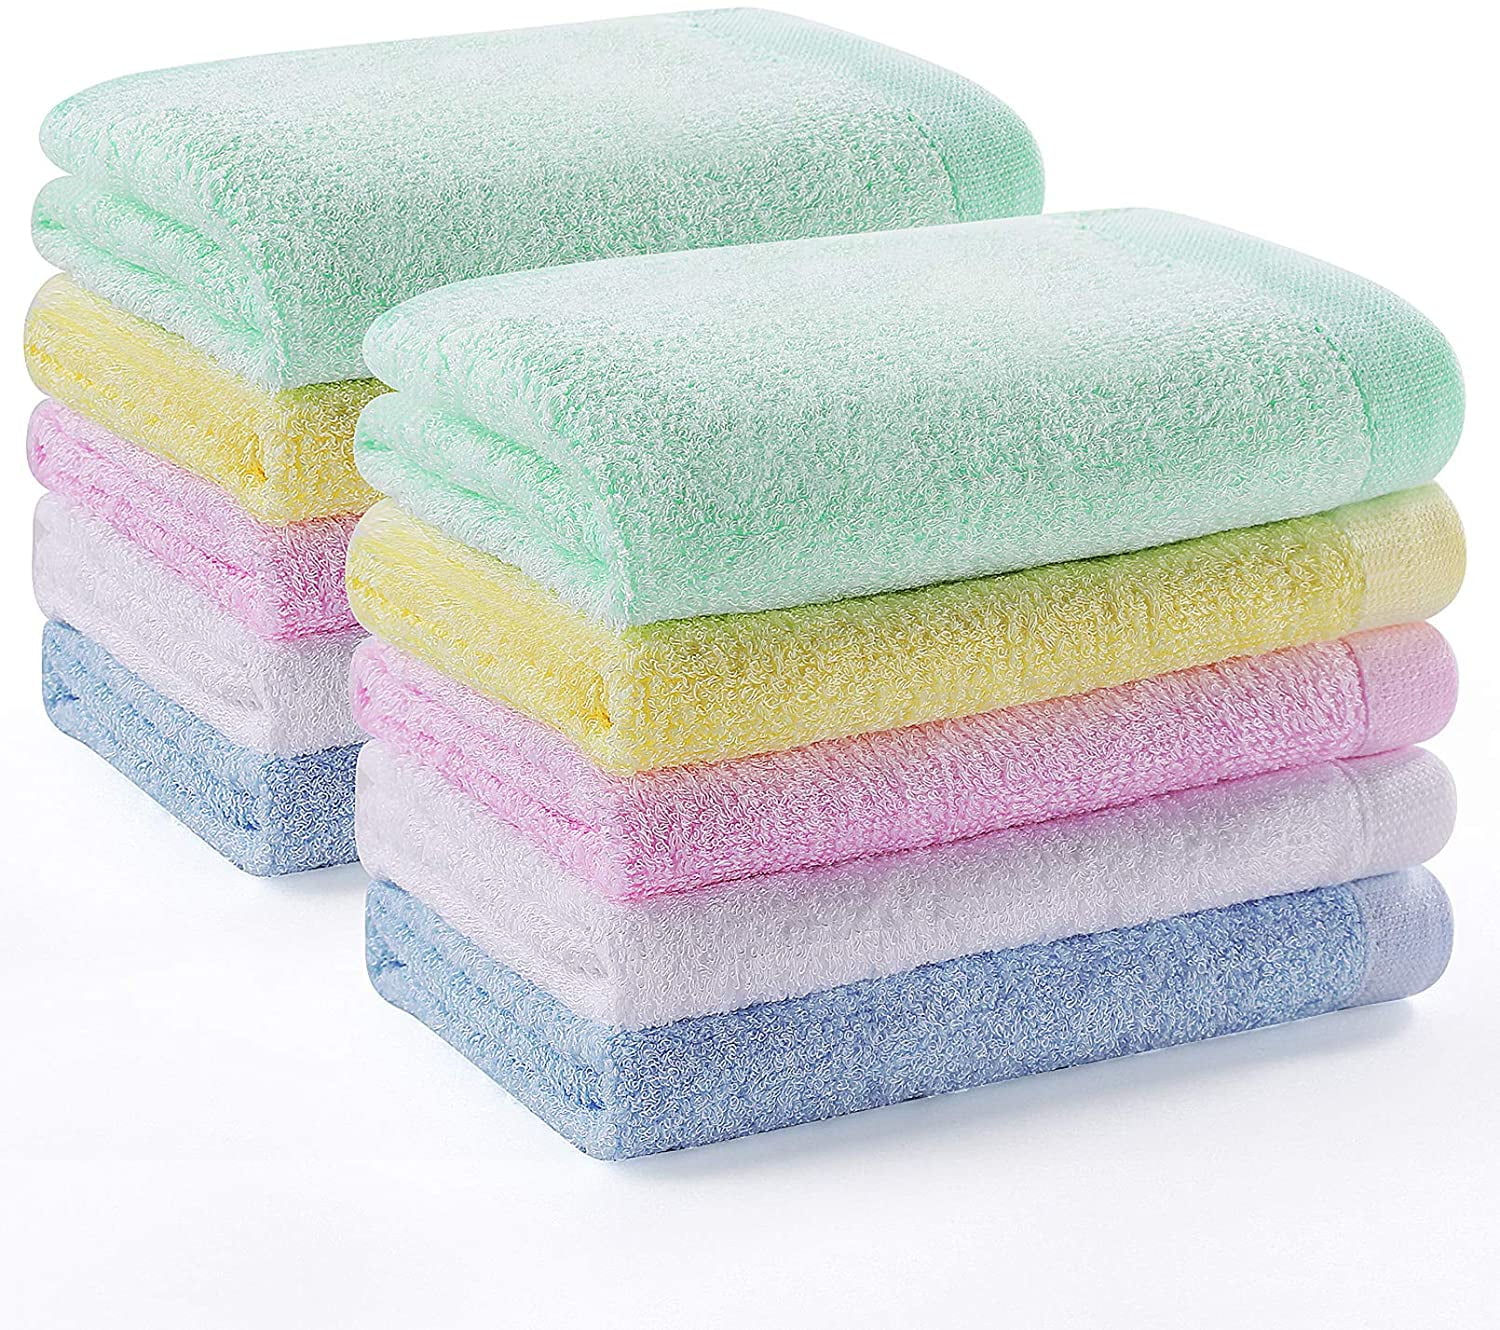 Super Absorbent Face Cloths Washcloths for Bathroom Extra Soft Thick Face Wash Cloths for Washing Face and Body 10 Pack 